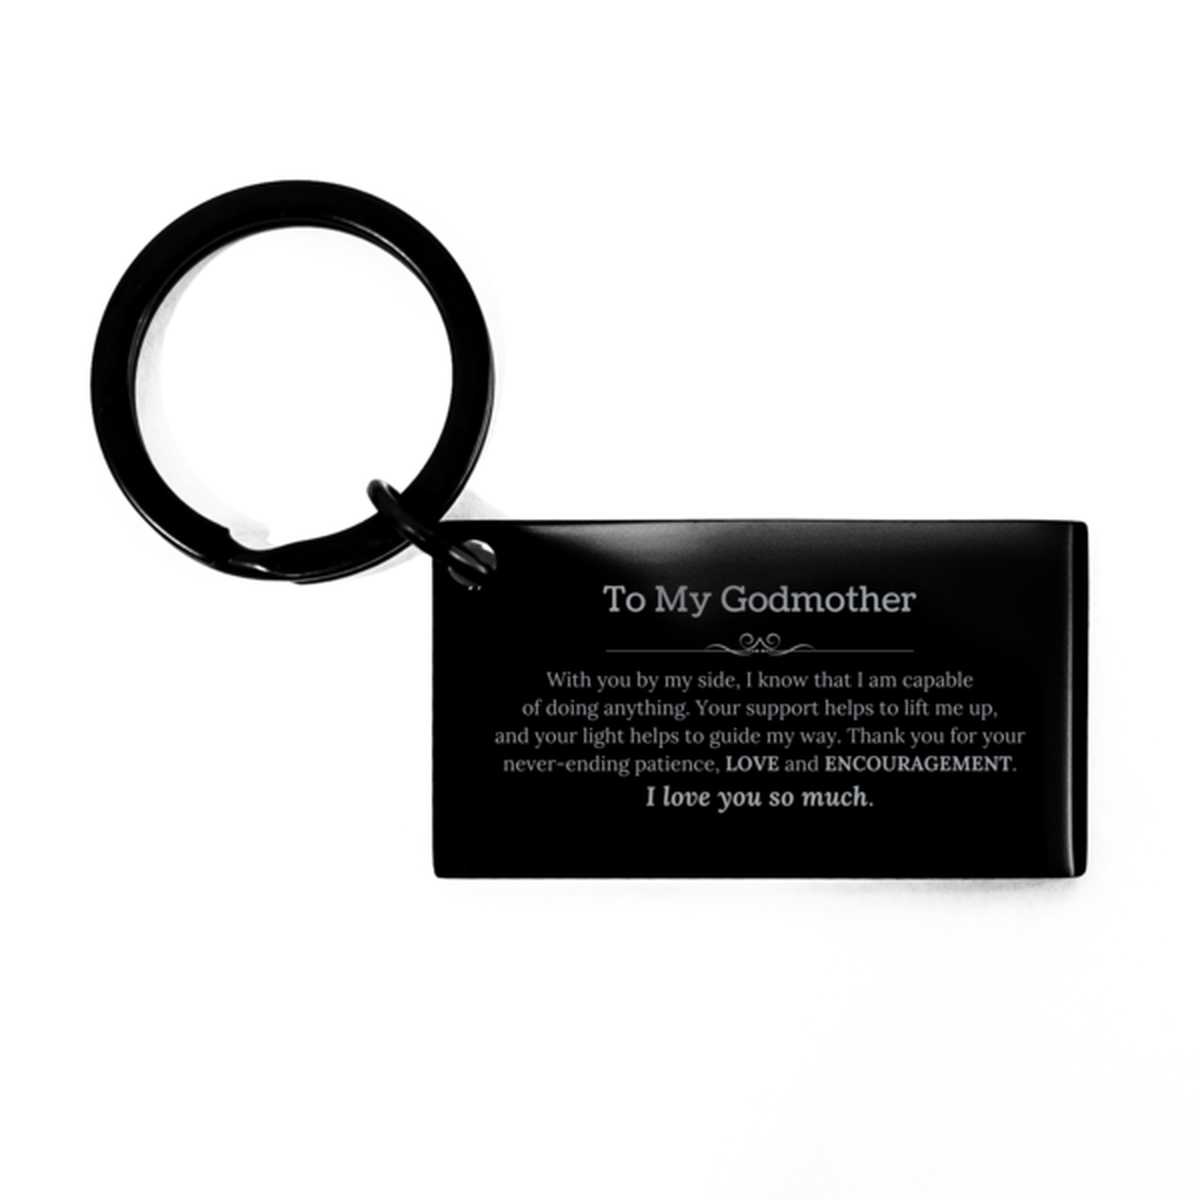 Appreciation Godmother Keychain Gifts, To My Godmother Birthday Christmas Wedding Keepsake Gifts for Godmother With you by my side, I know that I am capable of doing anything. I love you so much